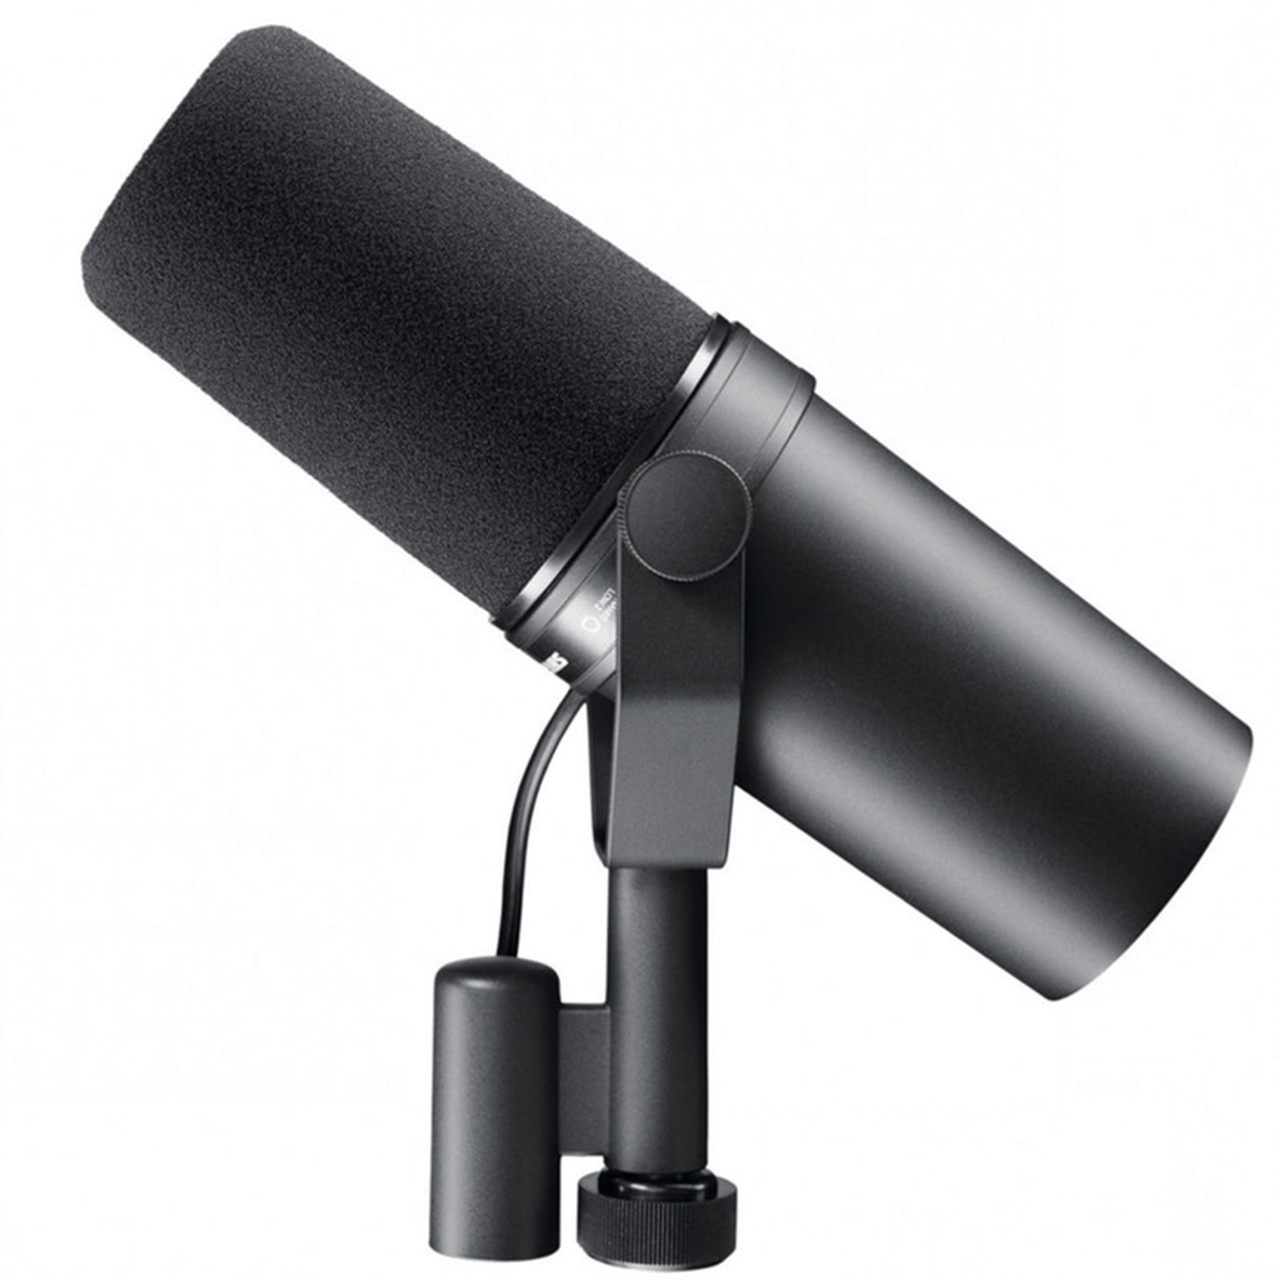 Shure SM7B microphone review: A great studio upgrade